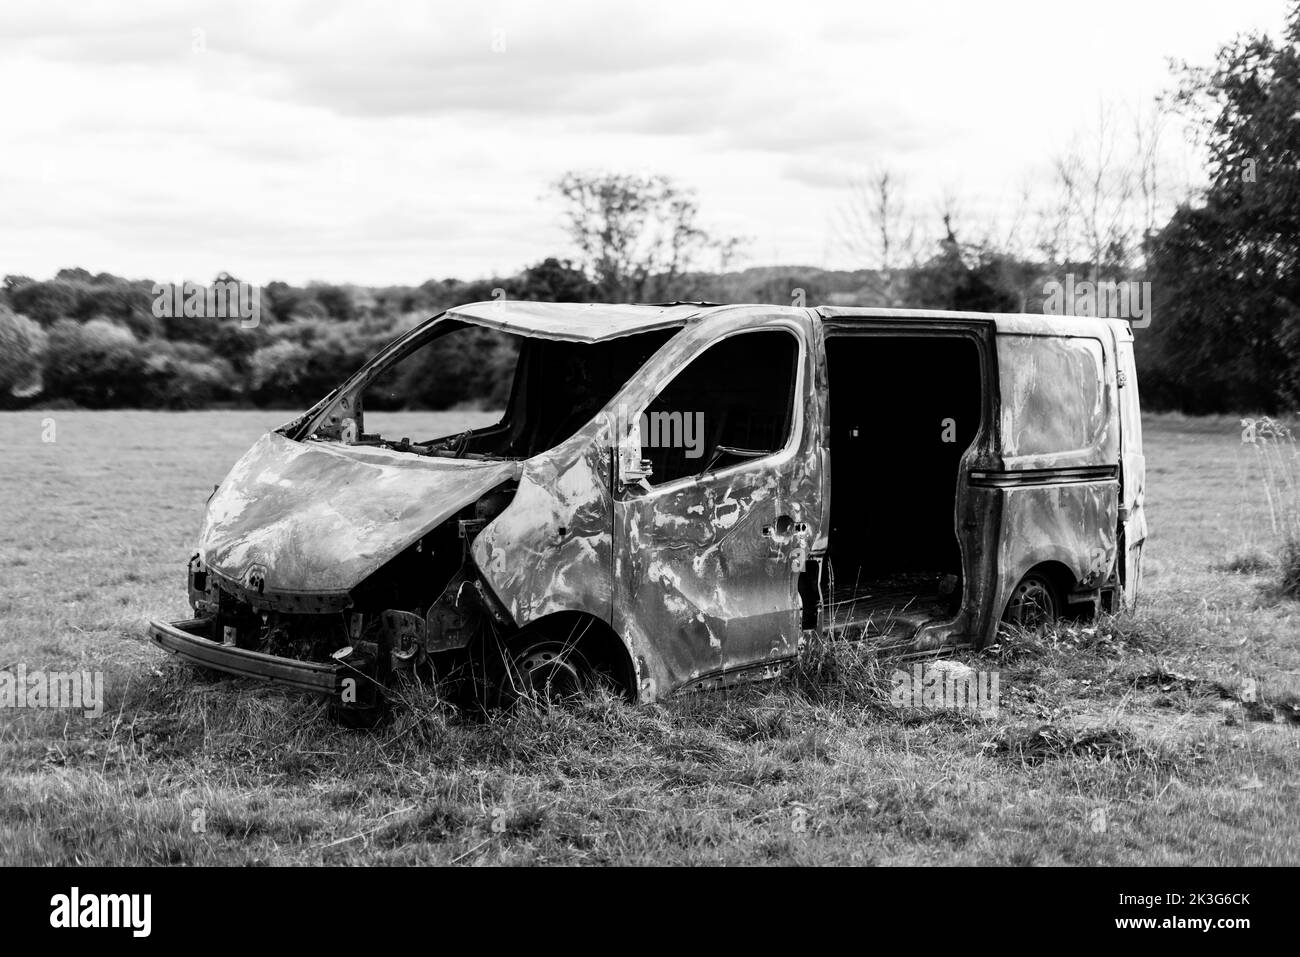 A burnt out worker's van rusty and abandoned in the middle of a field in the countryside Stock Photo